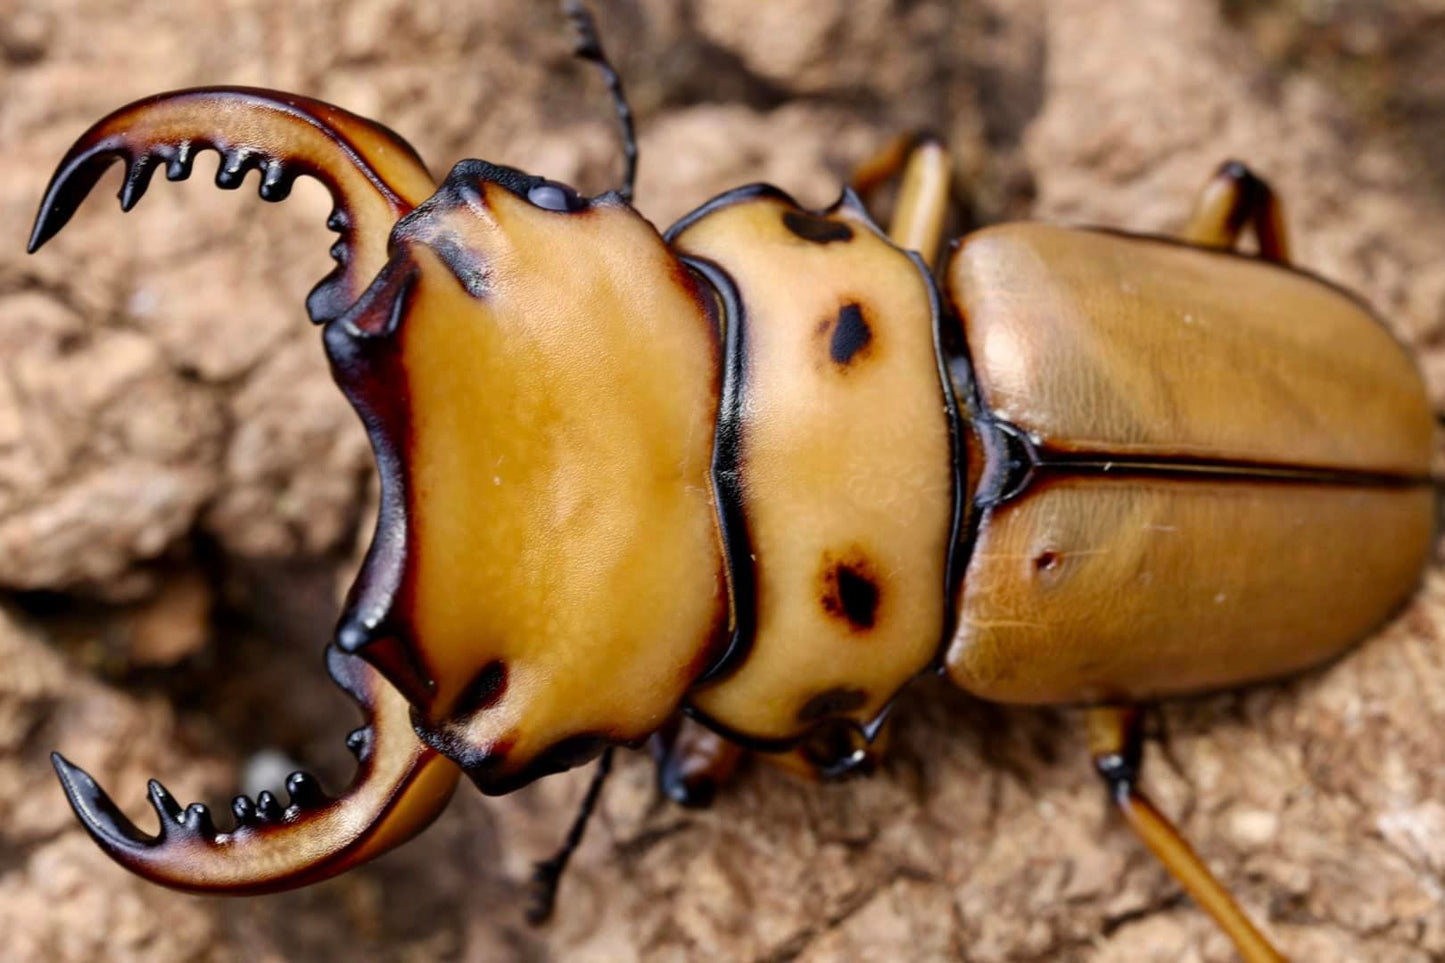 Homoderus mellyi (Crab Stag Beetle)